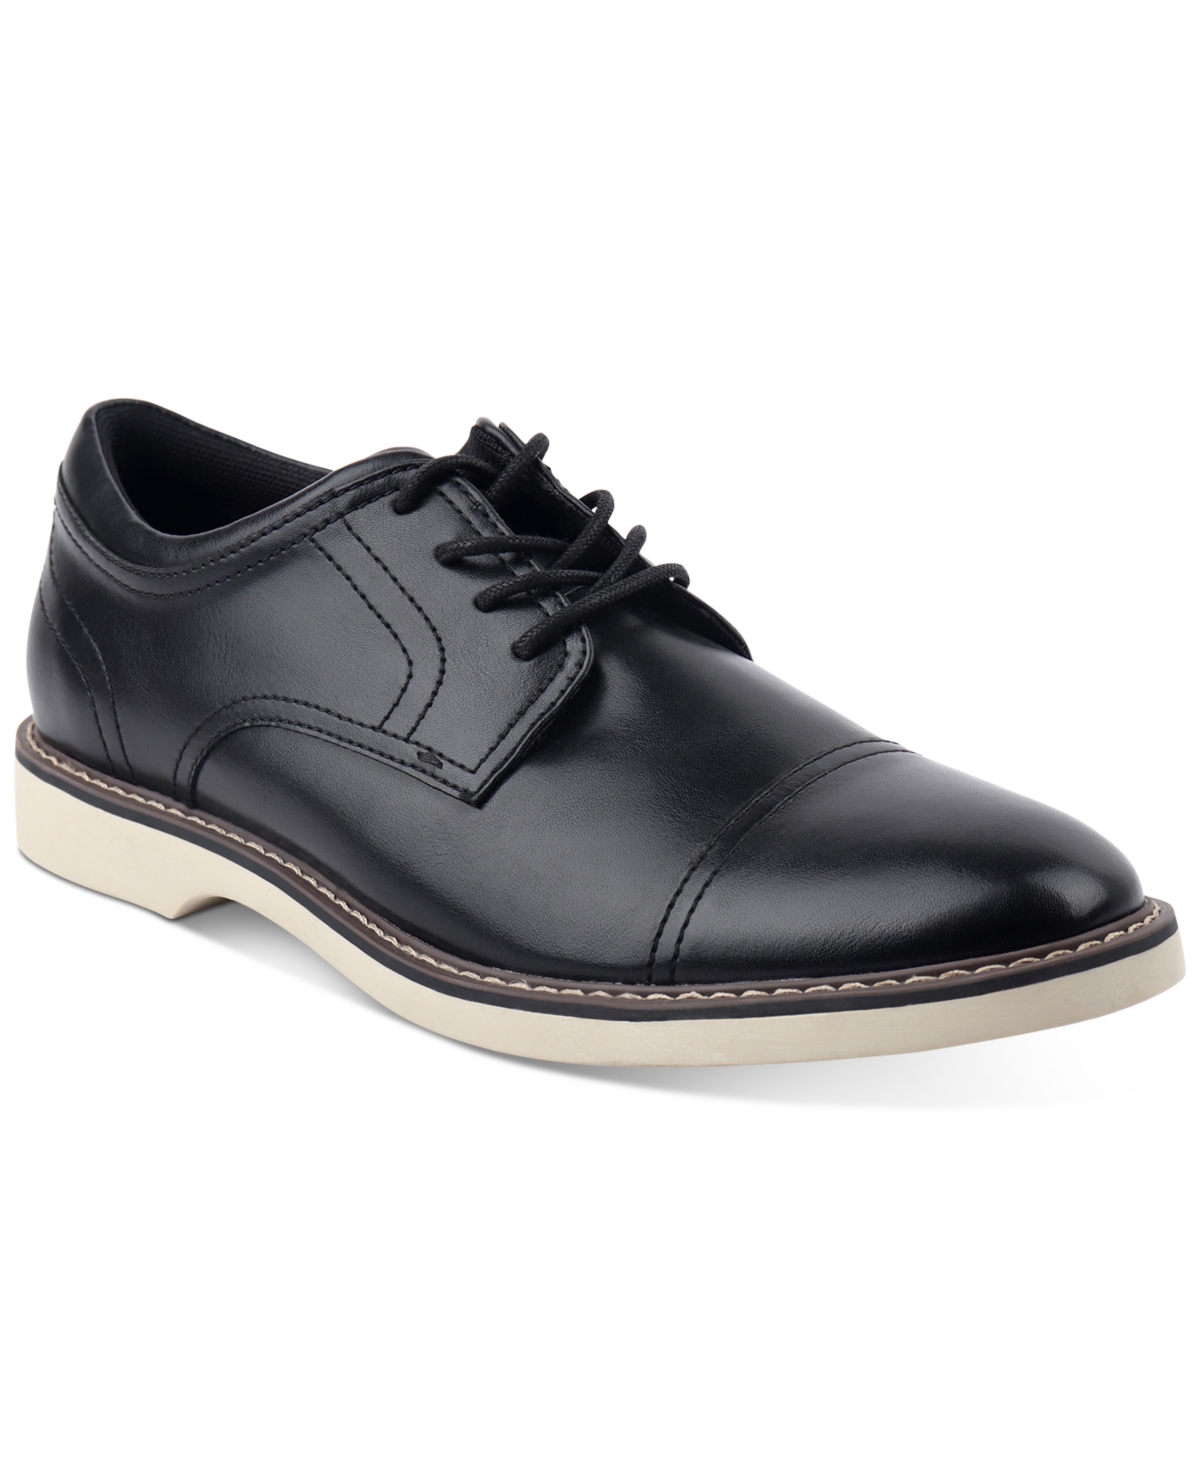 Men's Theo Cap Toe Oxford Dress Shoe, Created for Macy's - Brown